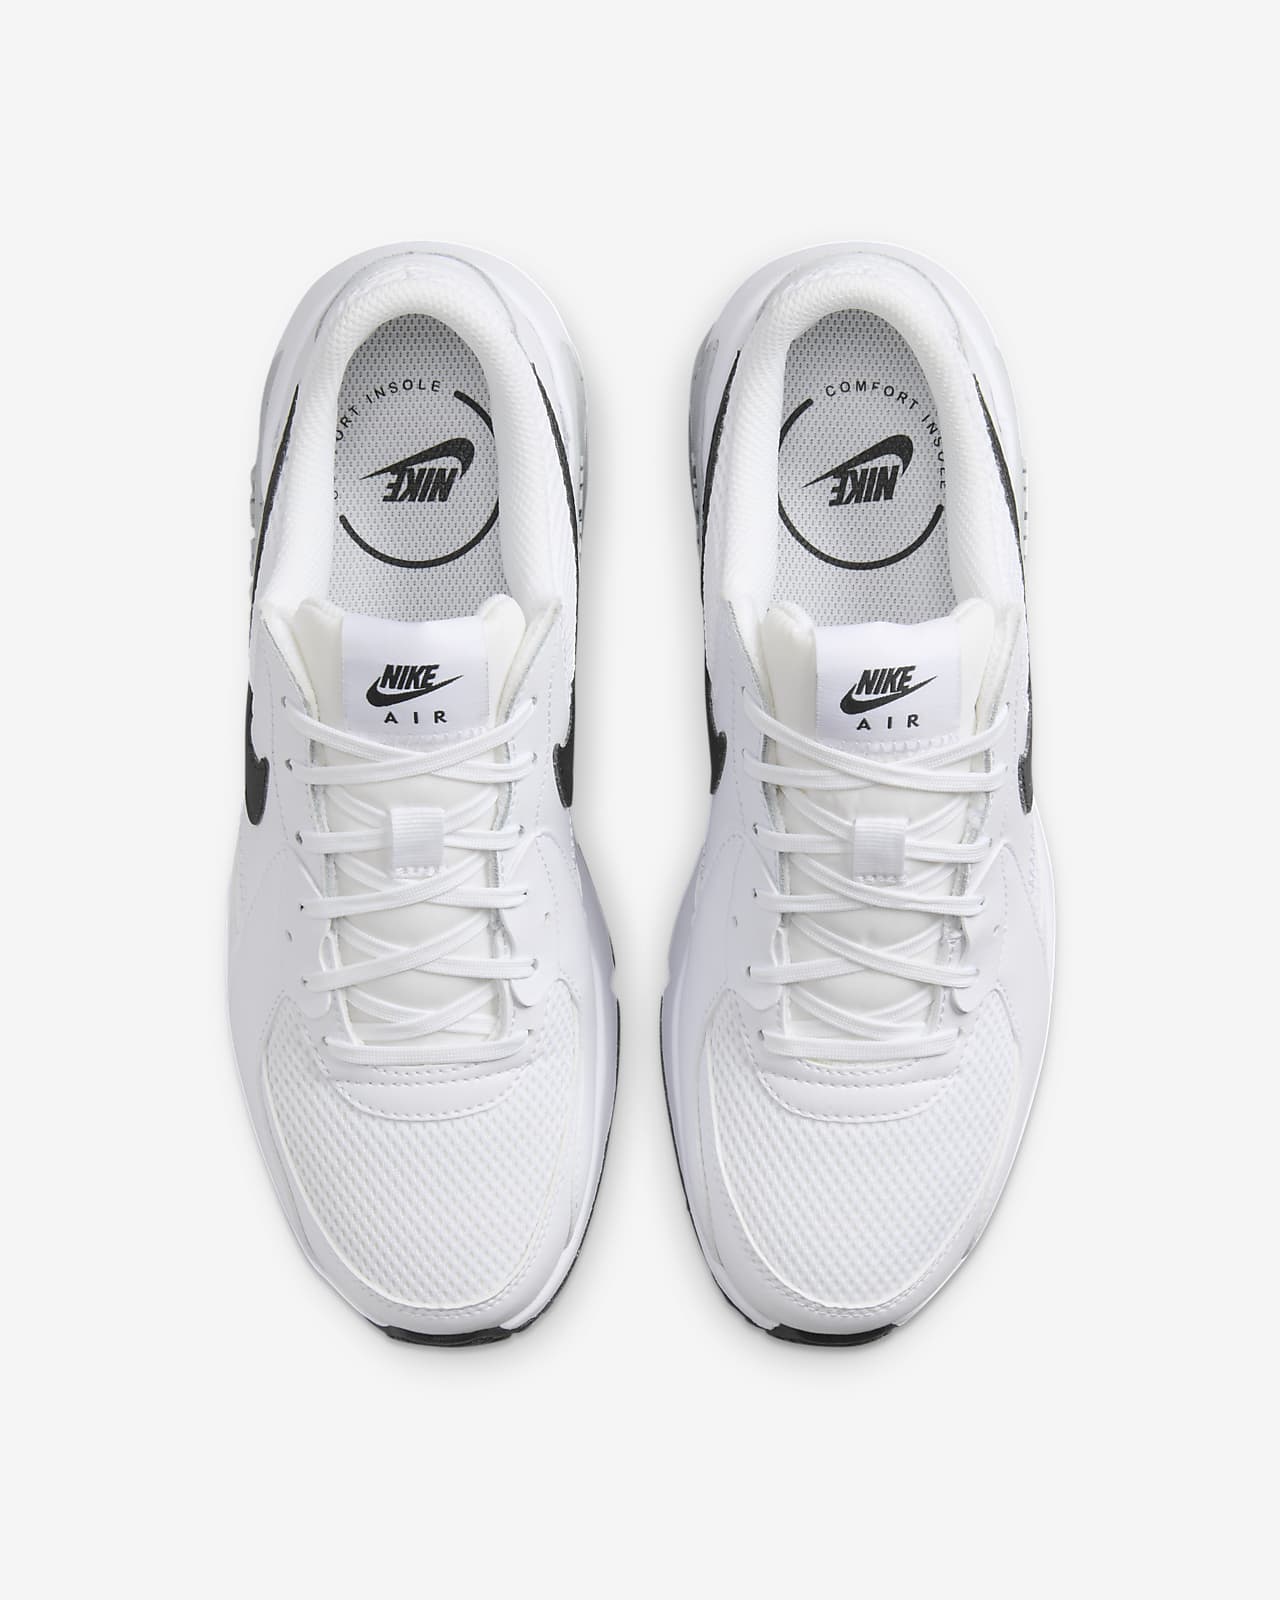 nike women's air max excee shoes white